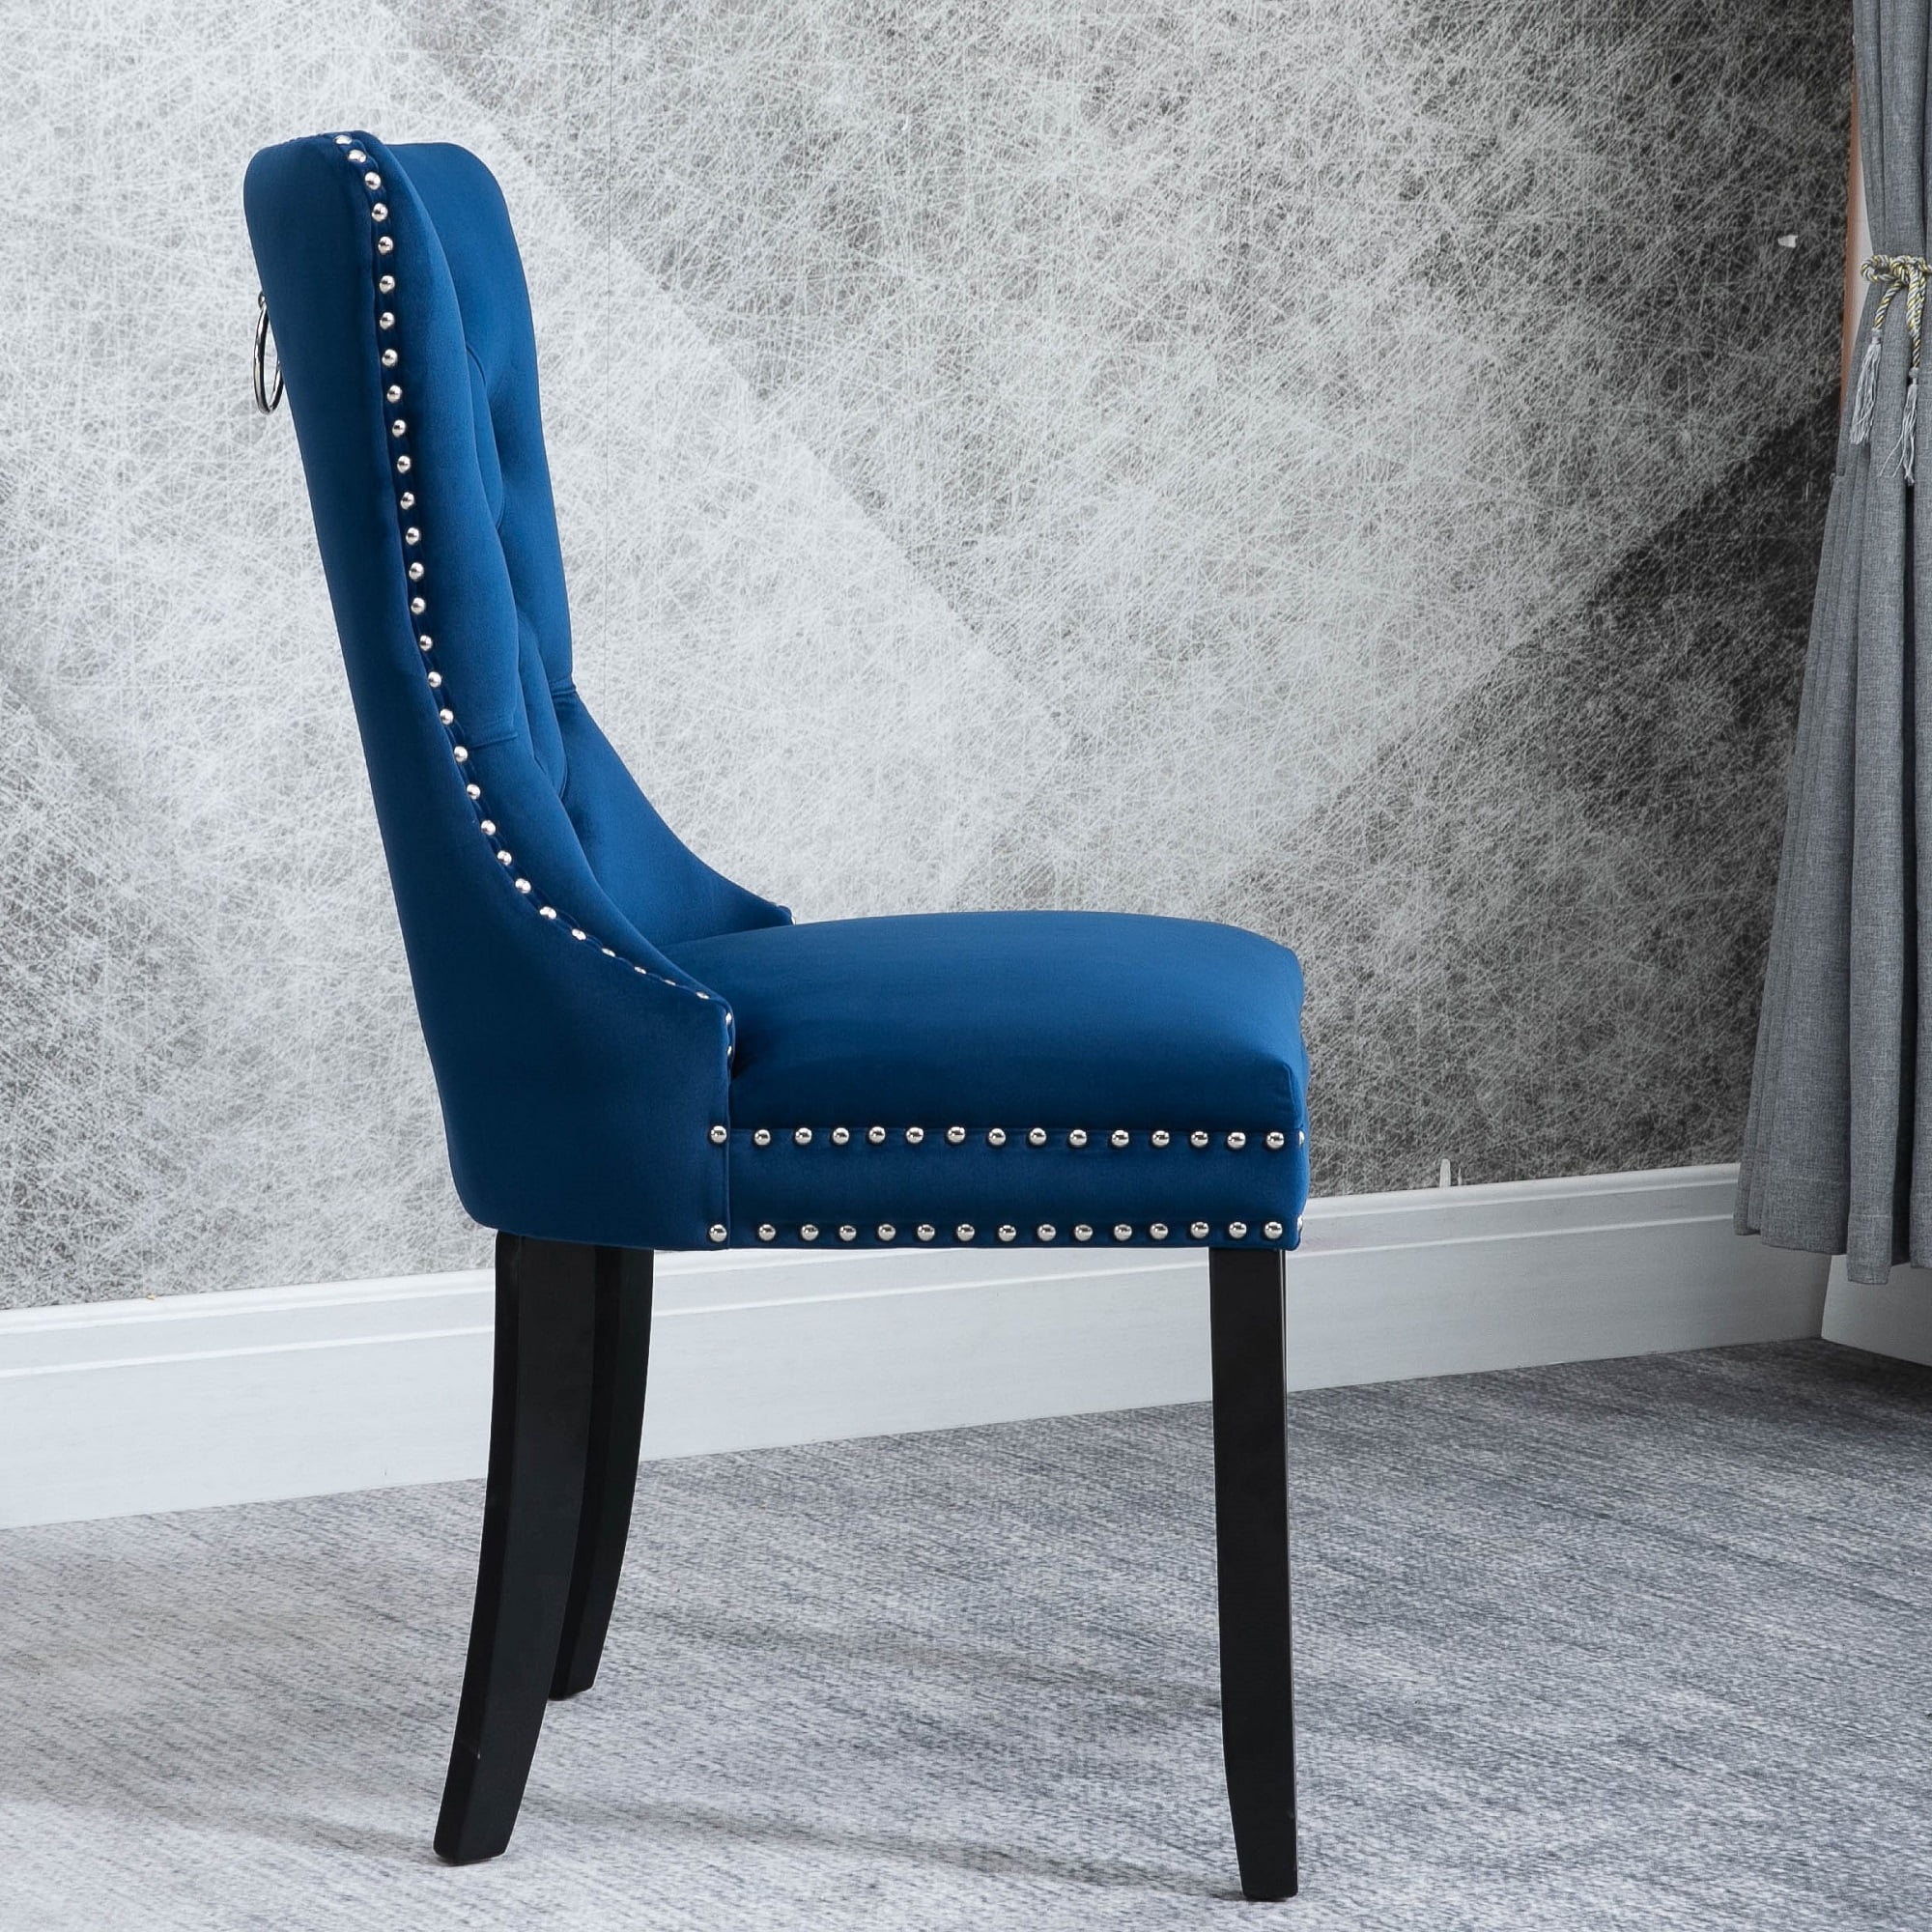 Creatice Accent Chairs For Living Room Clearance 